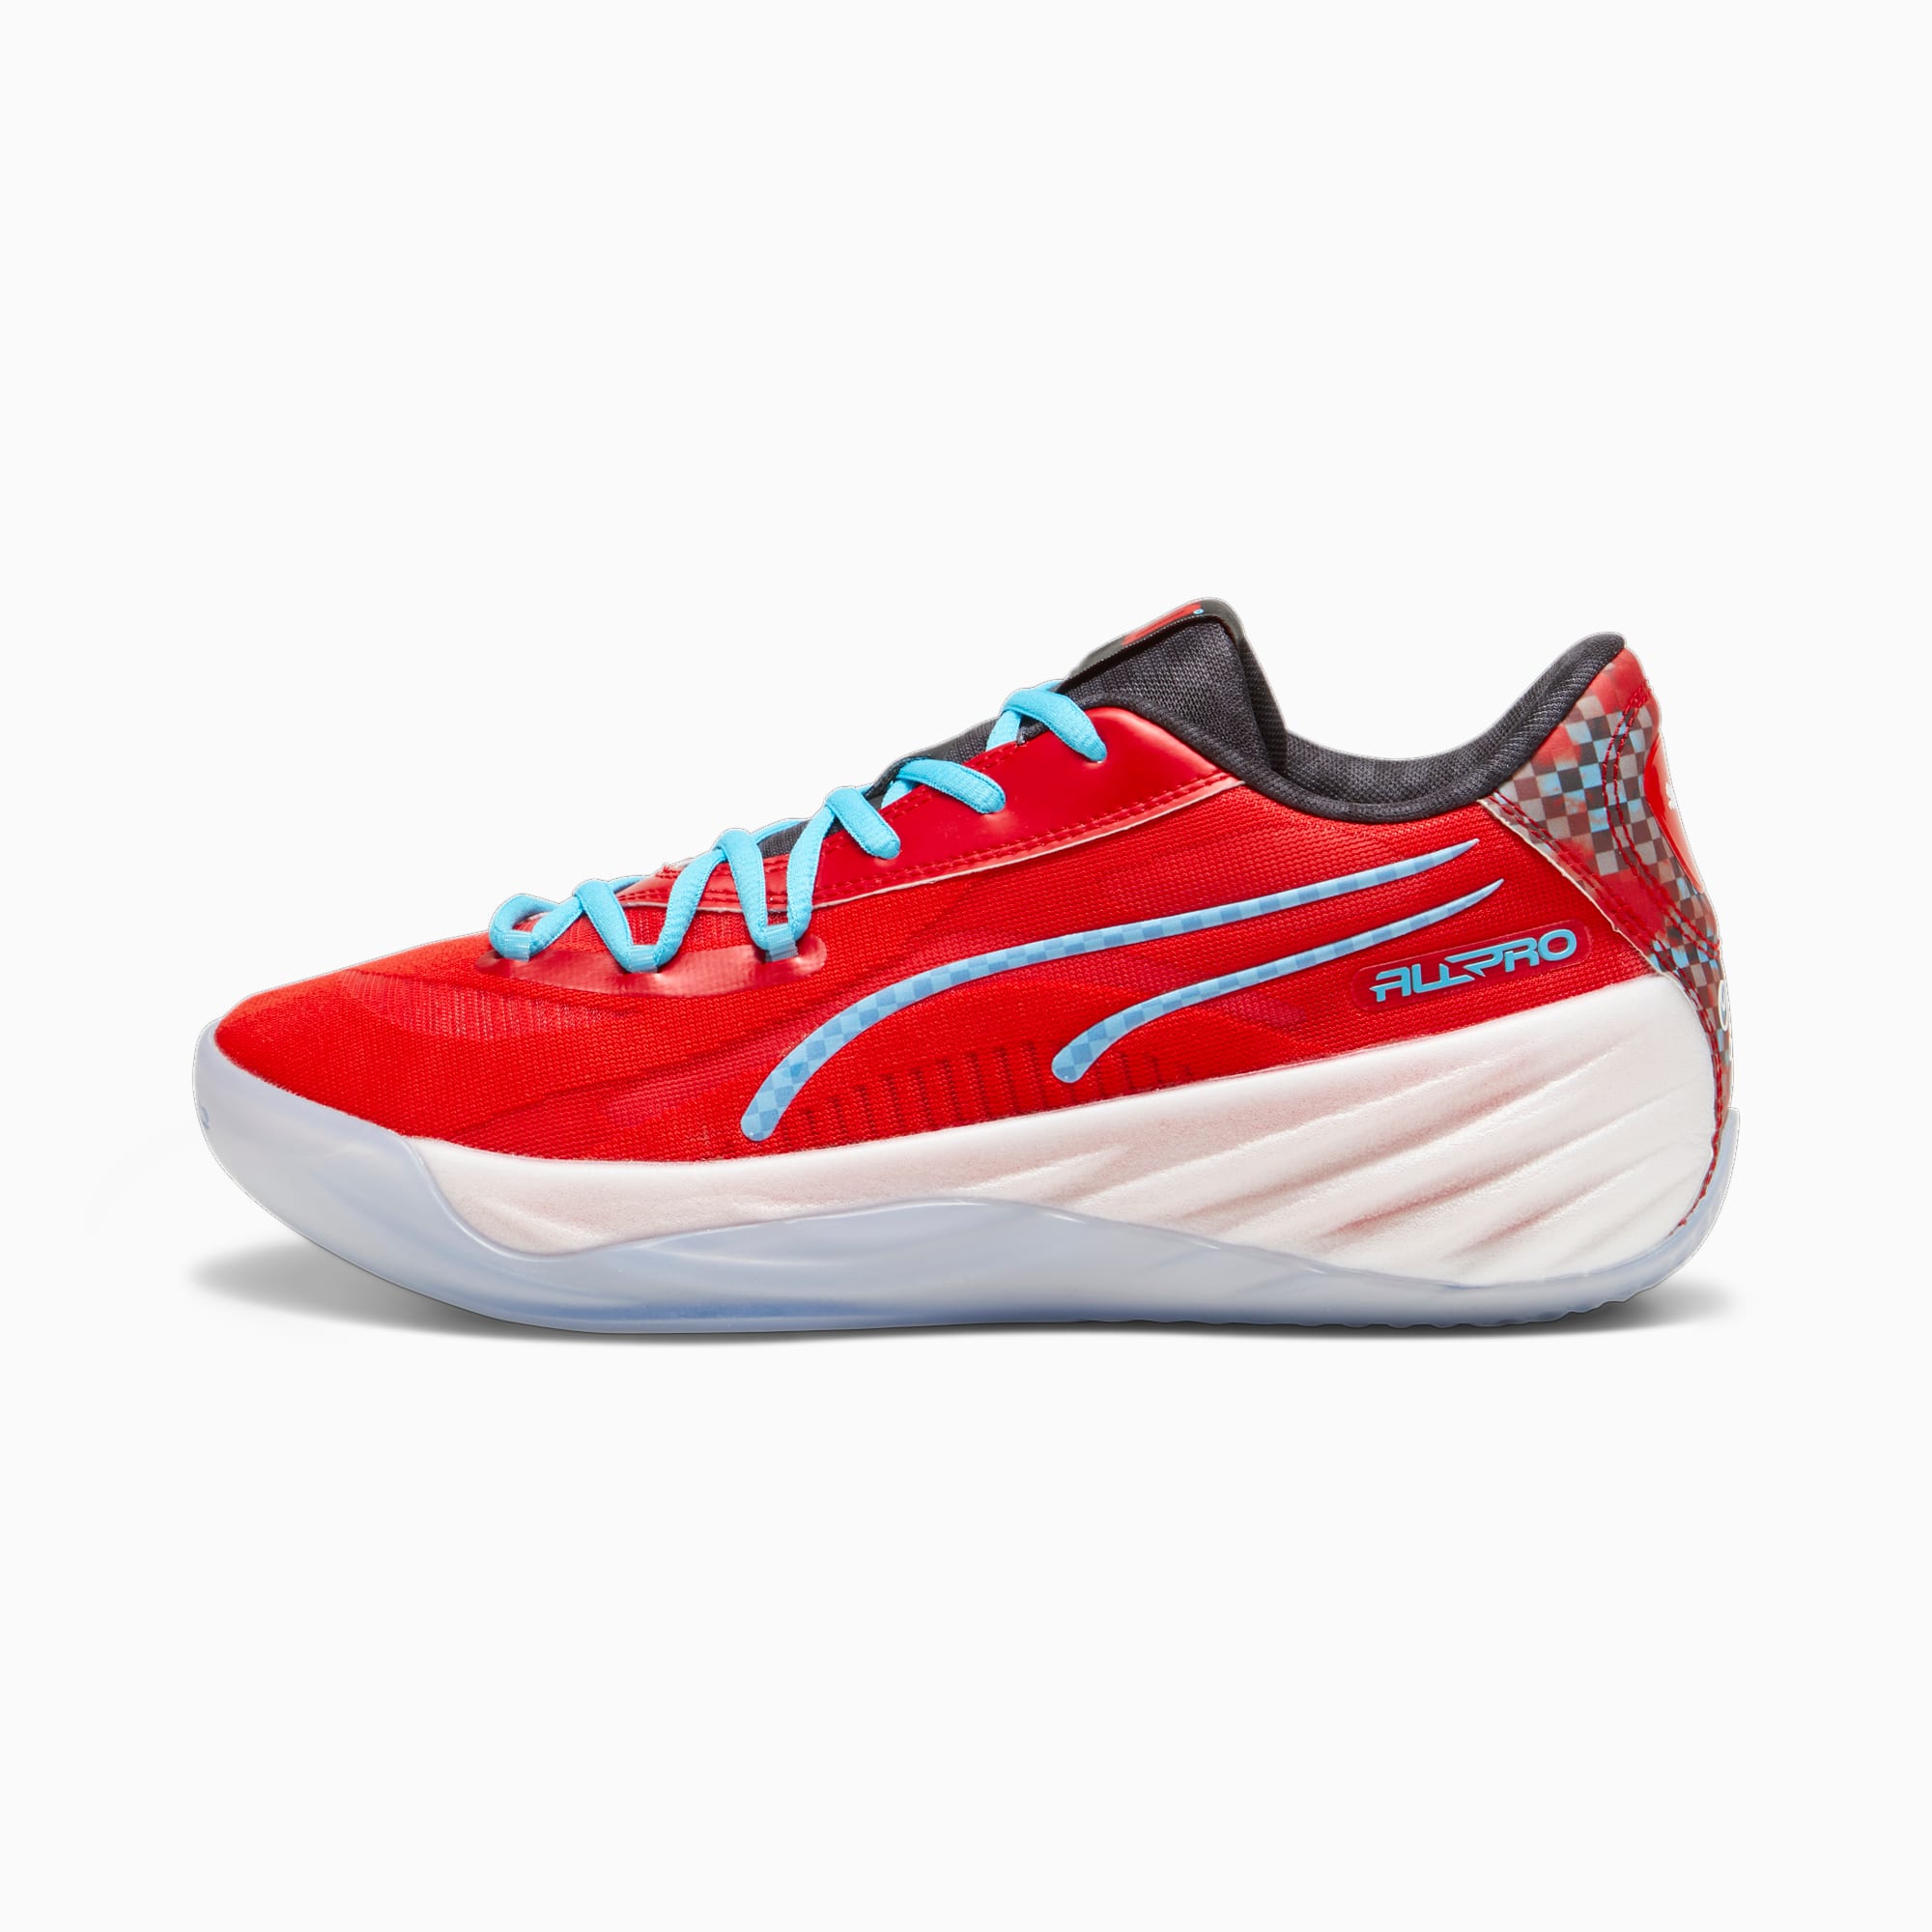 All-Pro NITRO Scoot Basketball Sneakers | For All Time Red-Bright Aqua ...